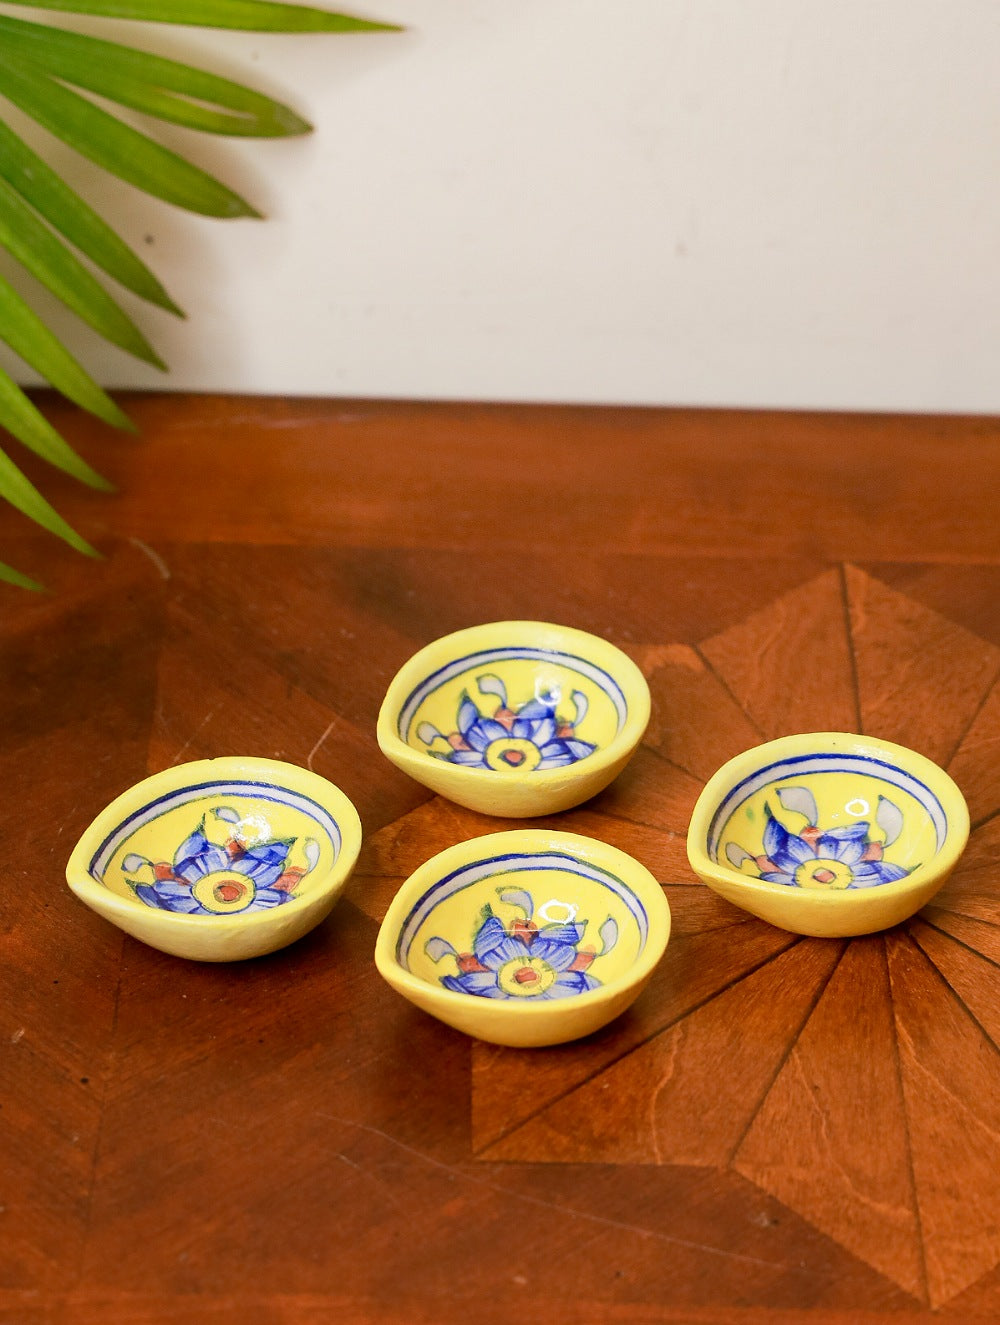 Load image into Gallery viewer, Blue Pottery Diya (Set of 4) - Yellow and Blue Flower